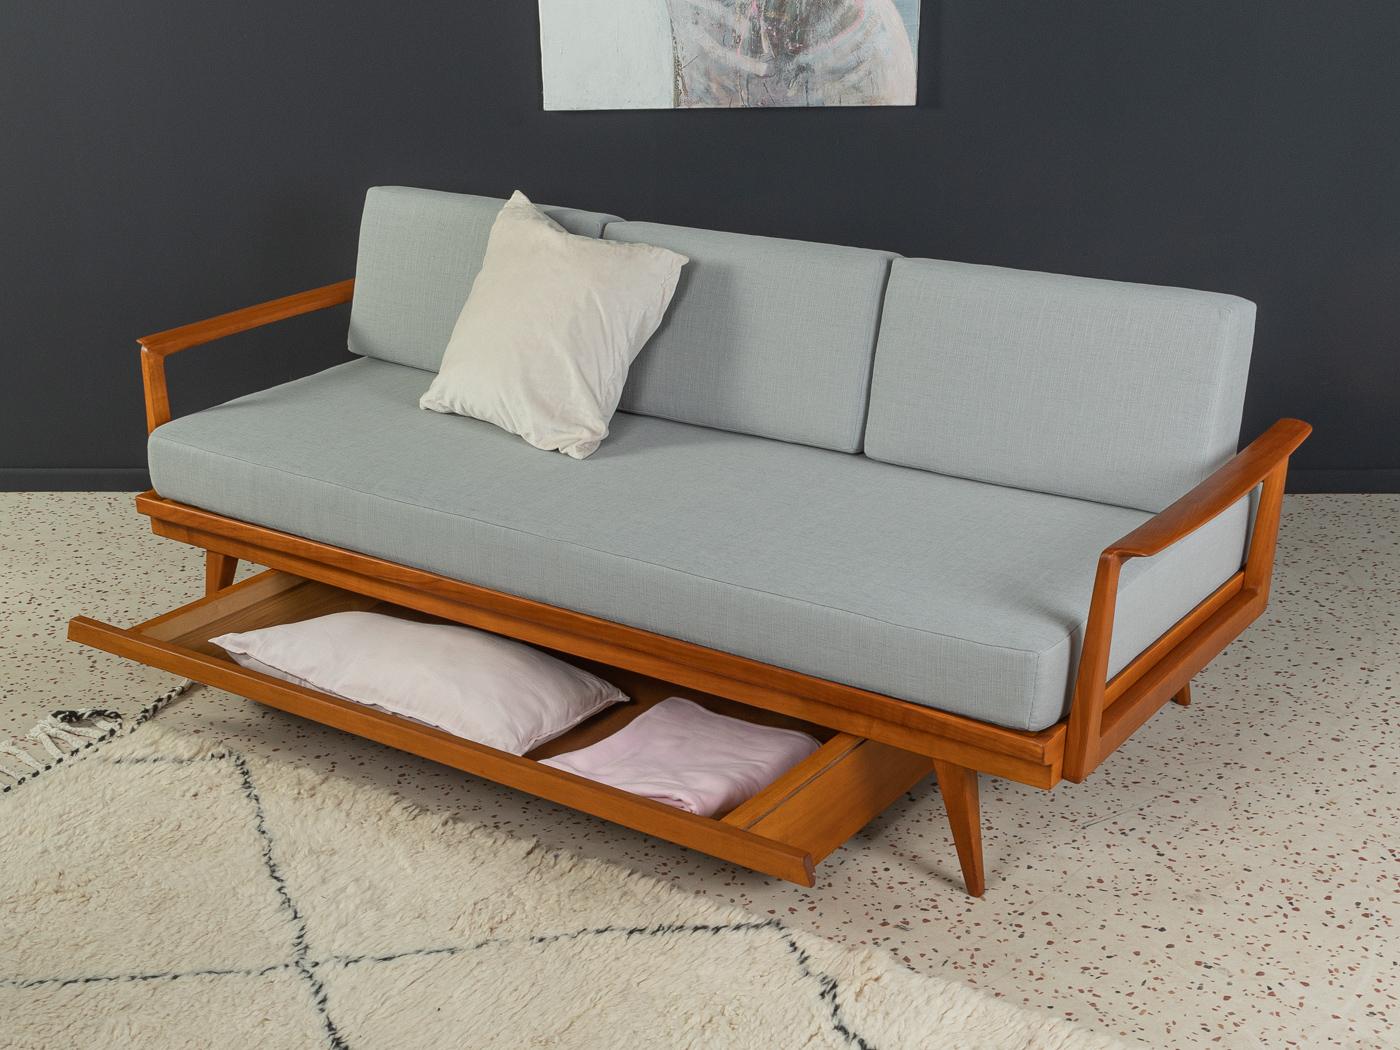 Wonderful sofa from the 1950s, solid frame and bed box in cherry wood stained in teak. The sofa has been reupholstered and covered with a high-quality fabric in light grey.

Quality features:
Accomplished design: perfect proportions
High-quality